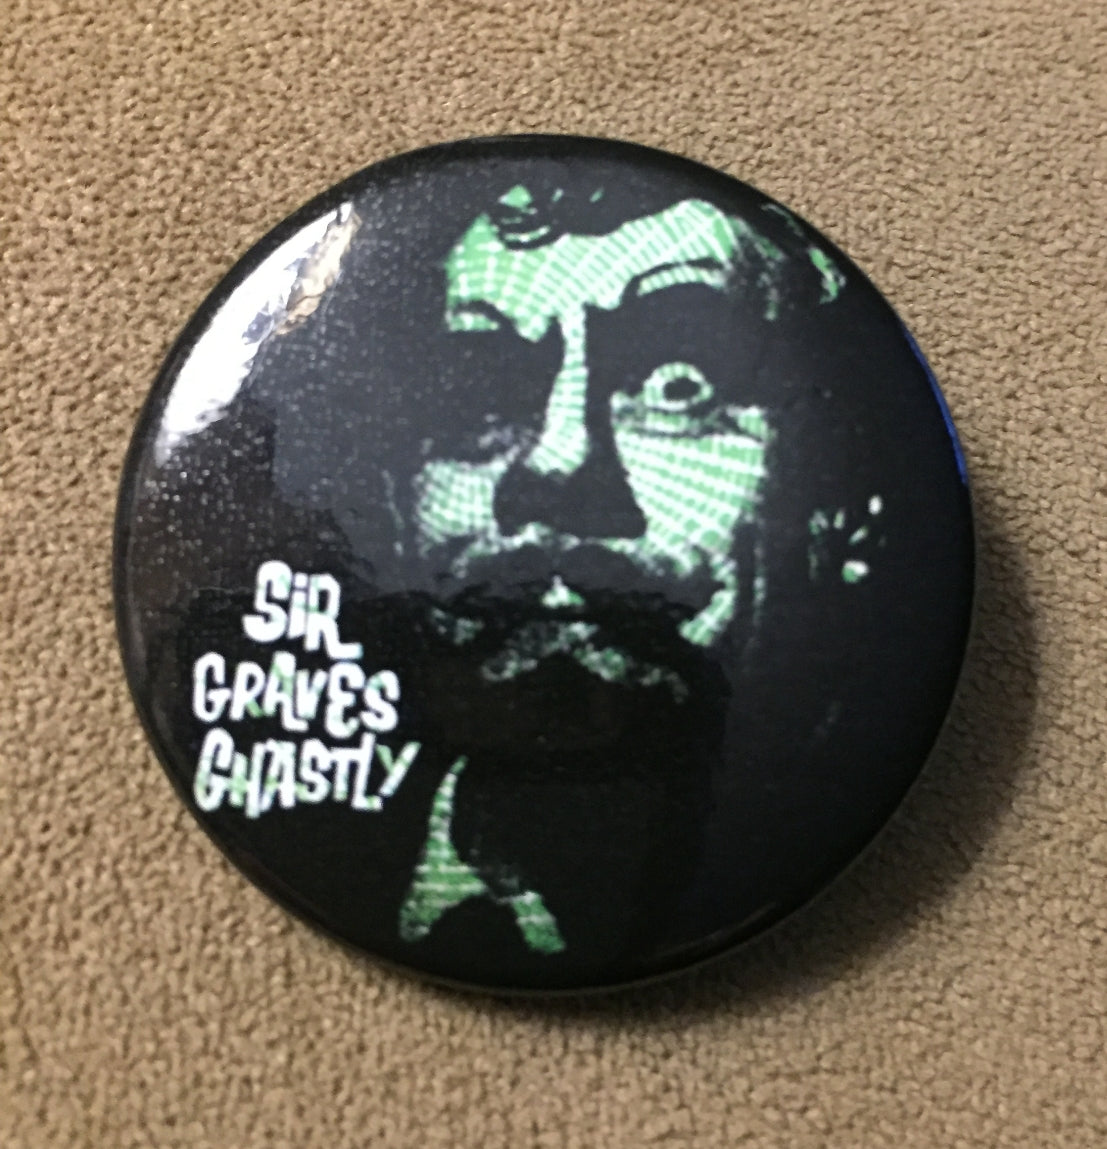 Sir Graves Ghastly 1.5" pinback button